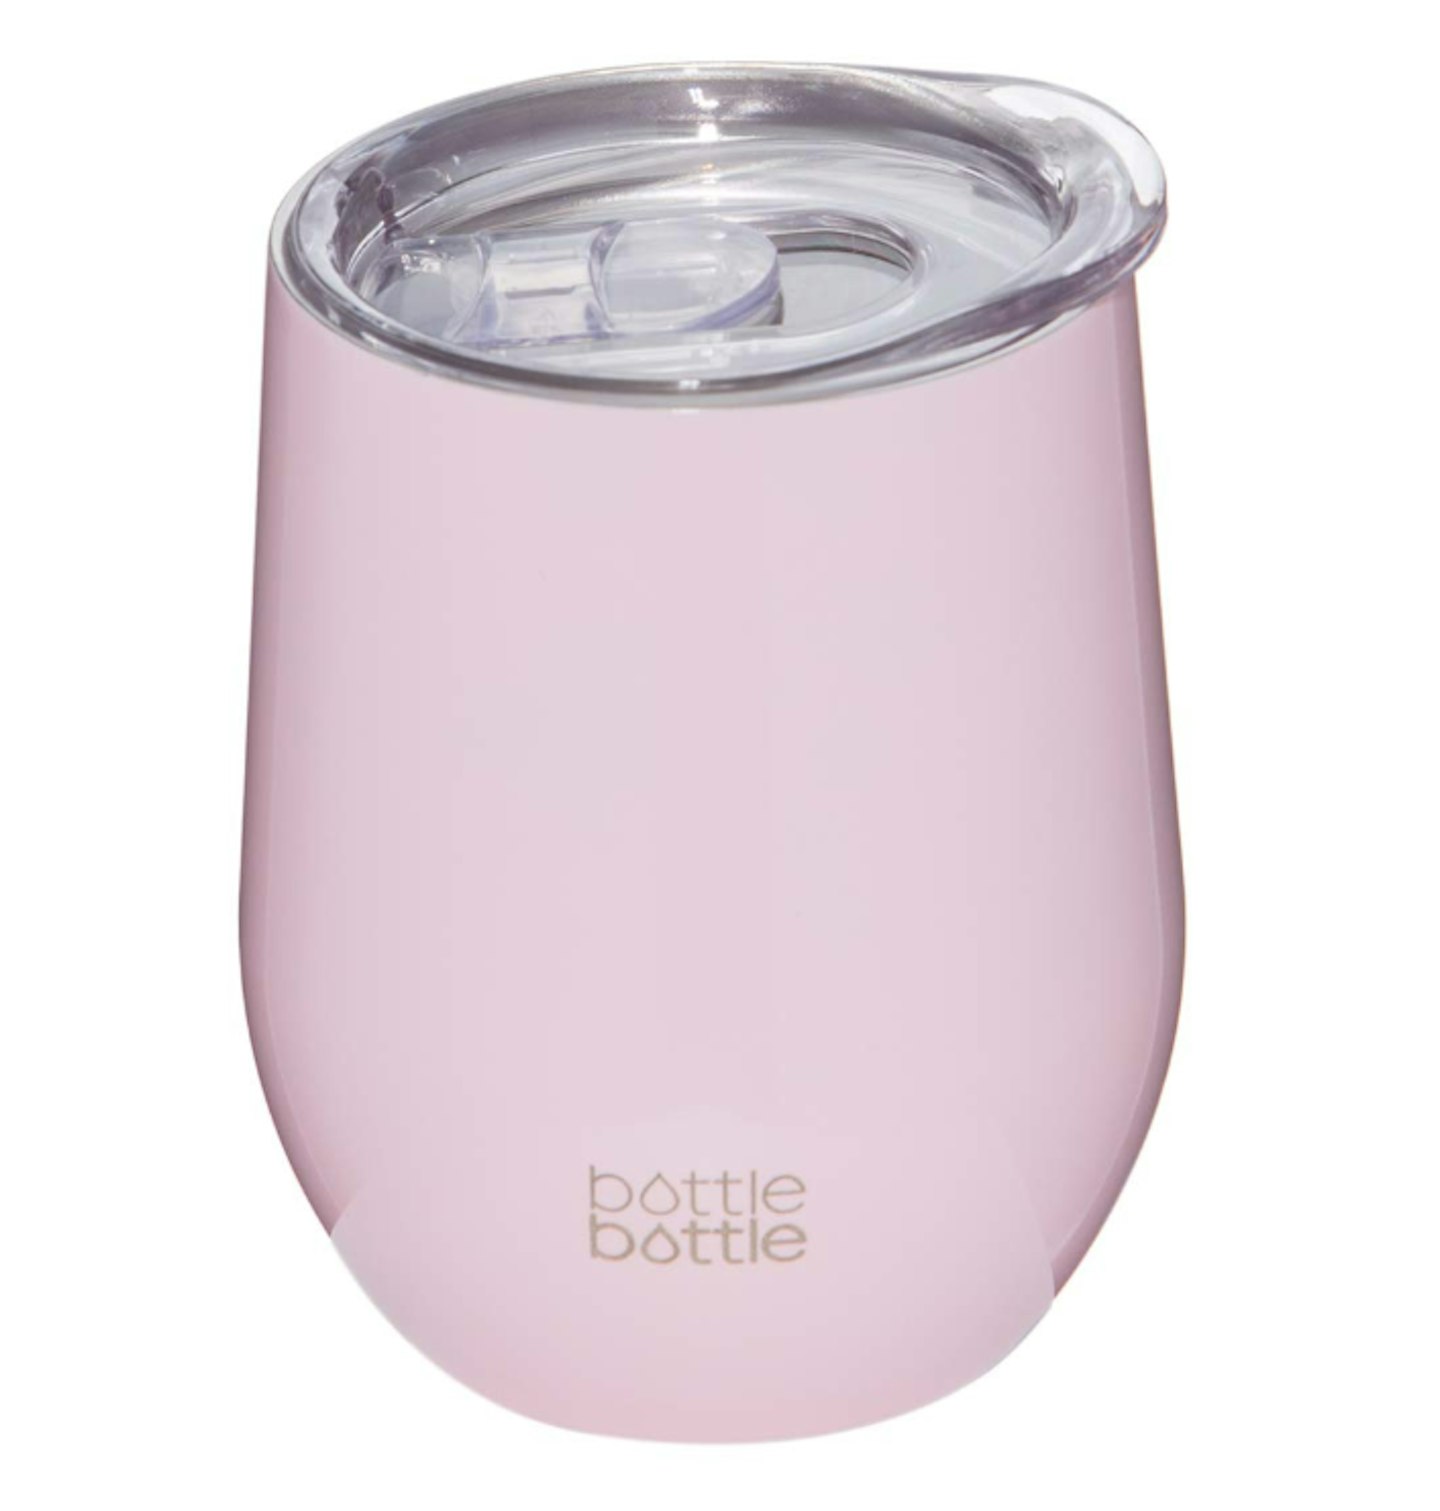 bottlebottle Tumbler, Stainless Steel Double Wall Insulated Large Coffee Mug, £10.99